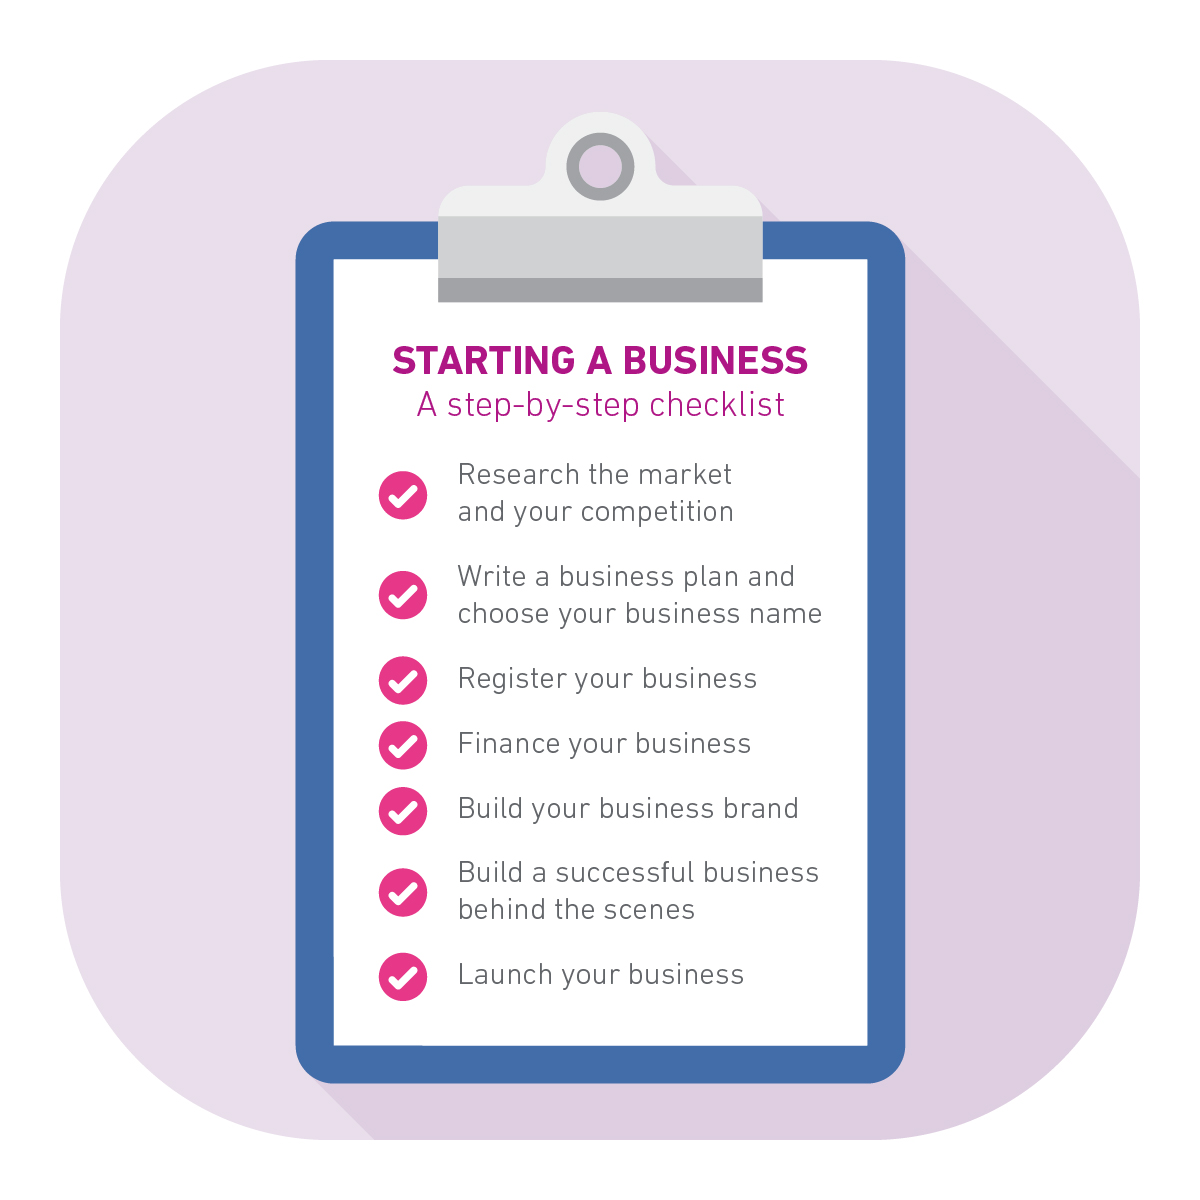 Graphic showing the checklist for starting a business